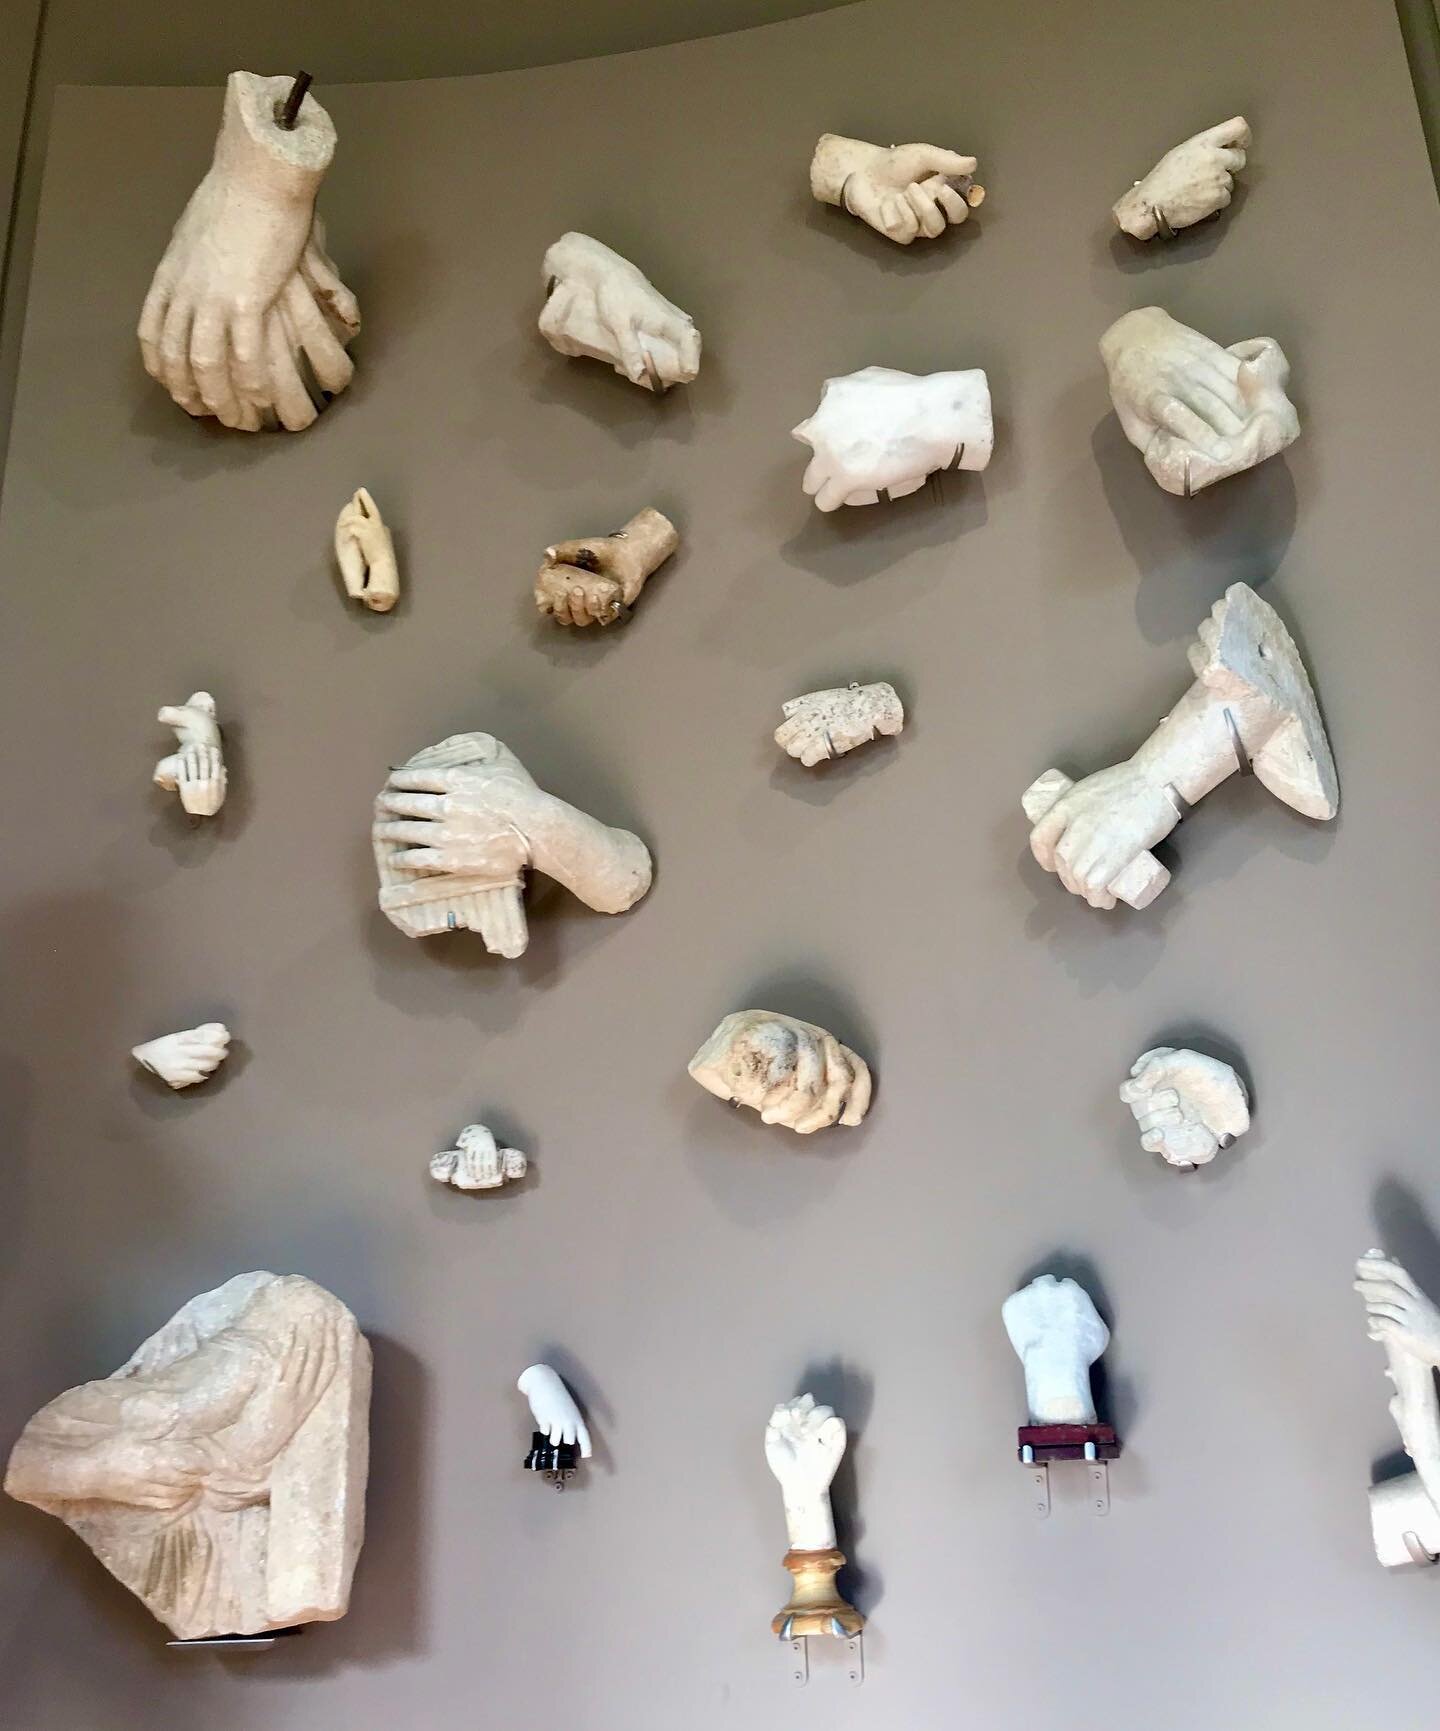 Hands, feet and heads by Rodin.  Looking at some of my photos from Paris, Musée Rodin Paris @museerodinparis. Among Rodin&rsquo;s greatest innovations was the use of assemblage, which unified his technical and creative methods.  Heads, limbs, hands,